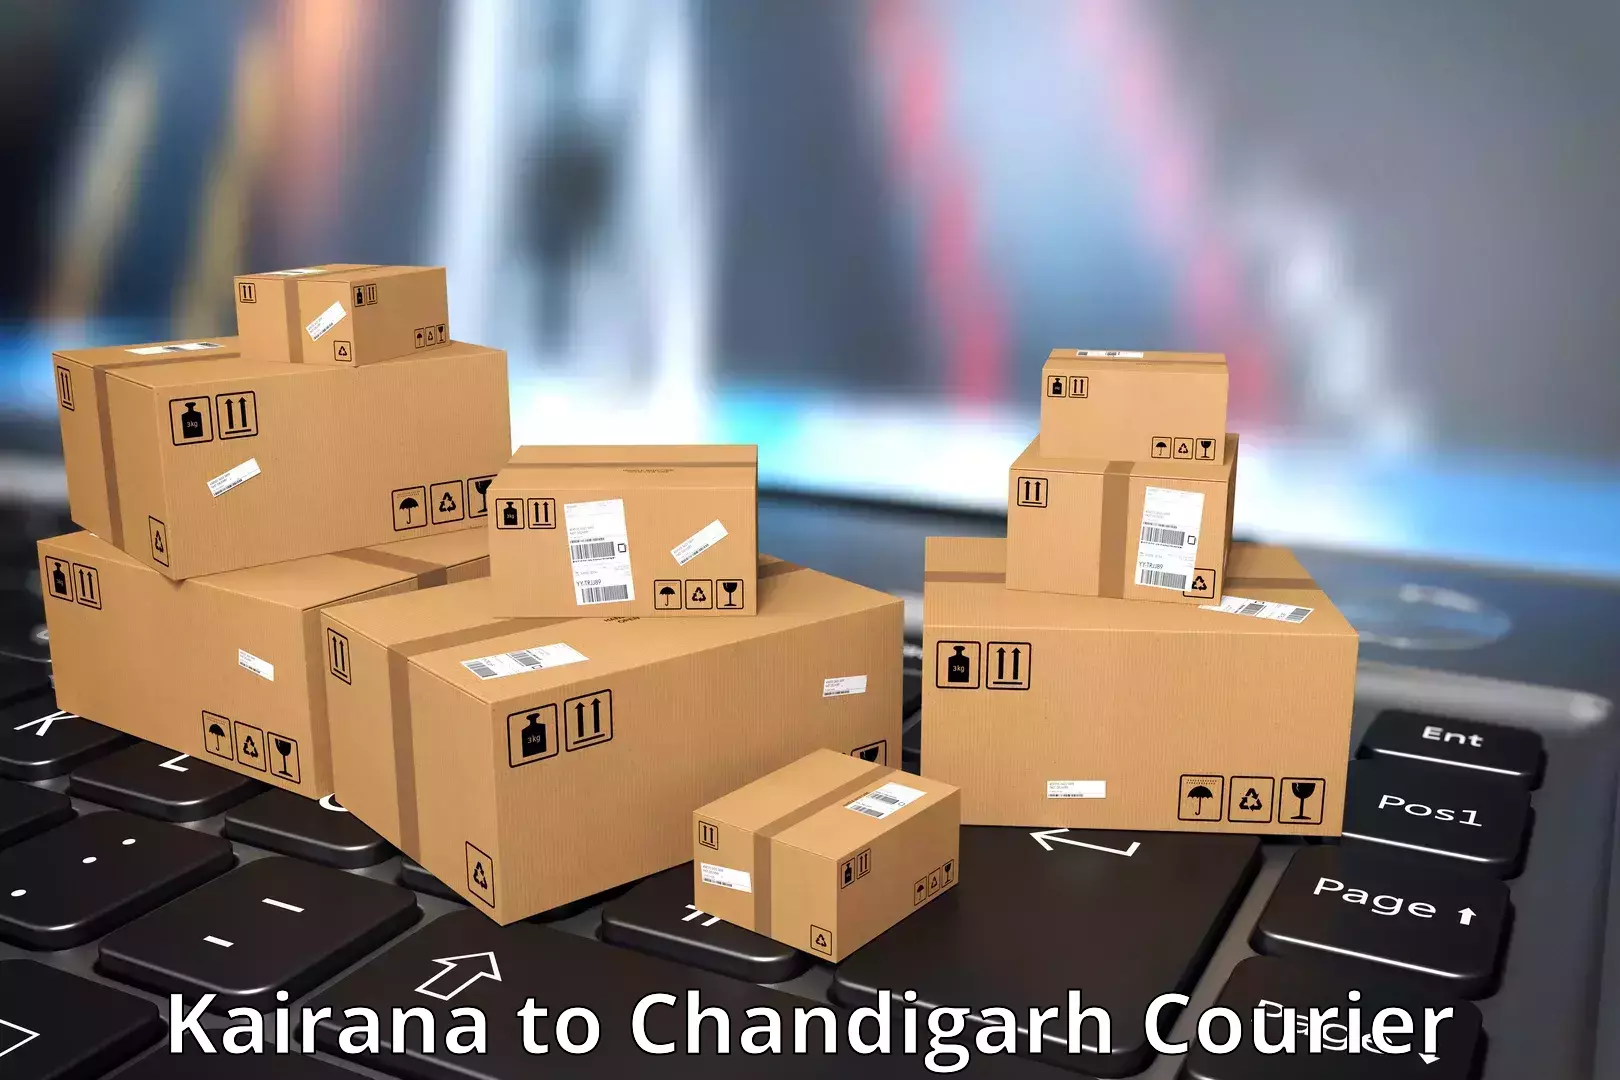 Package delivery network Kairana to Chandigarh